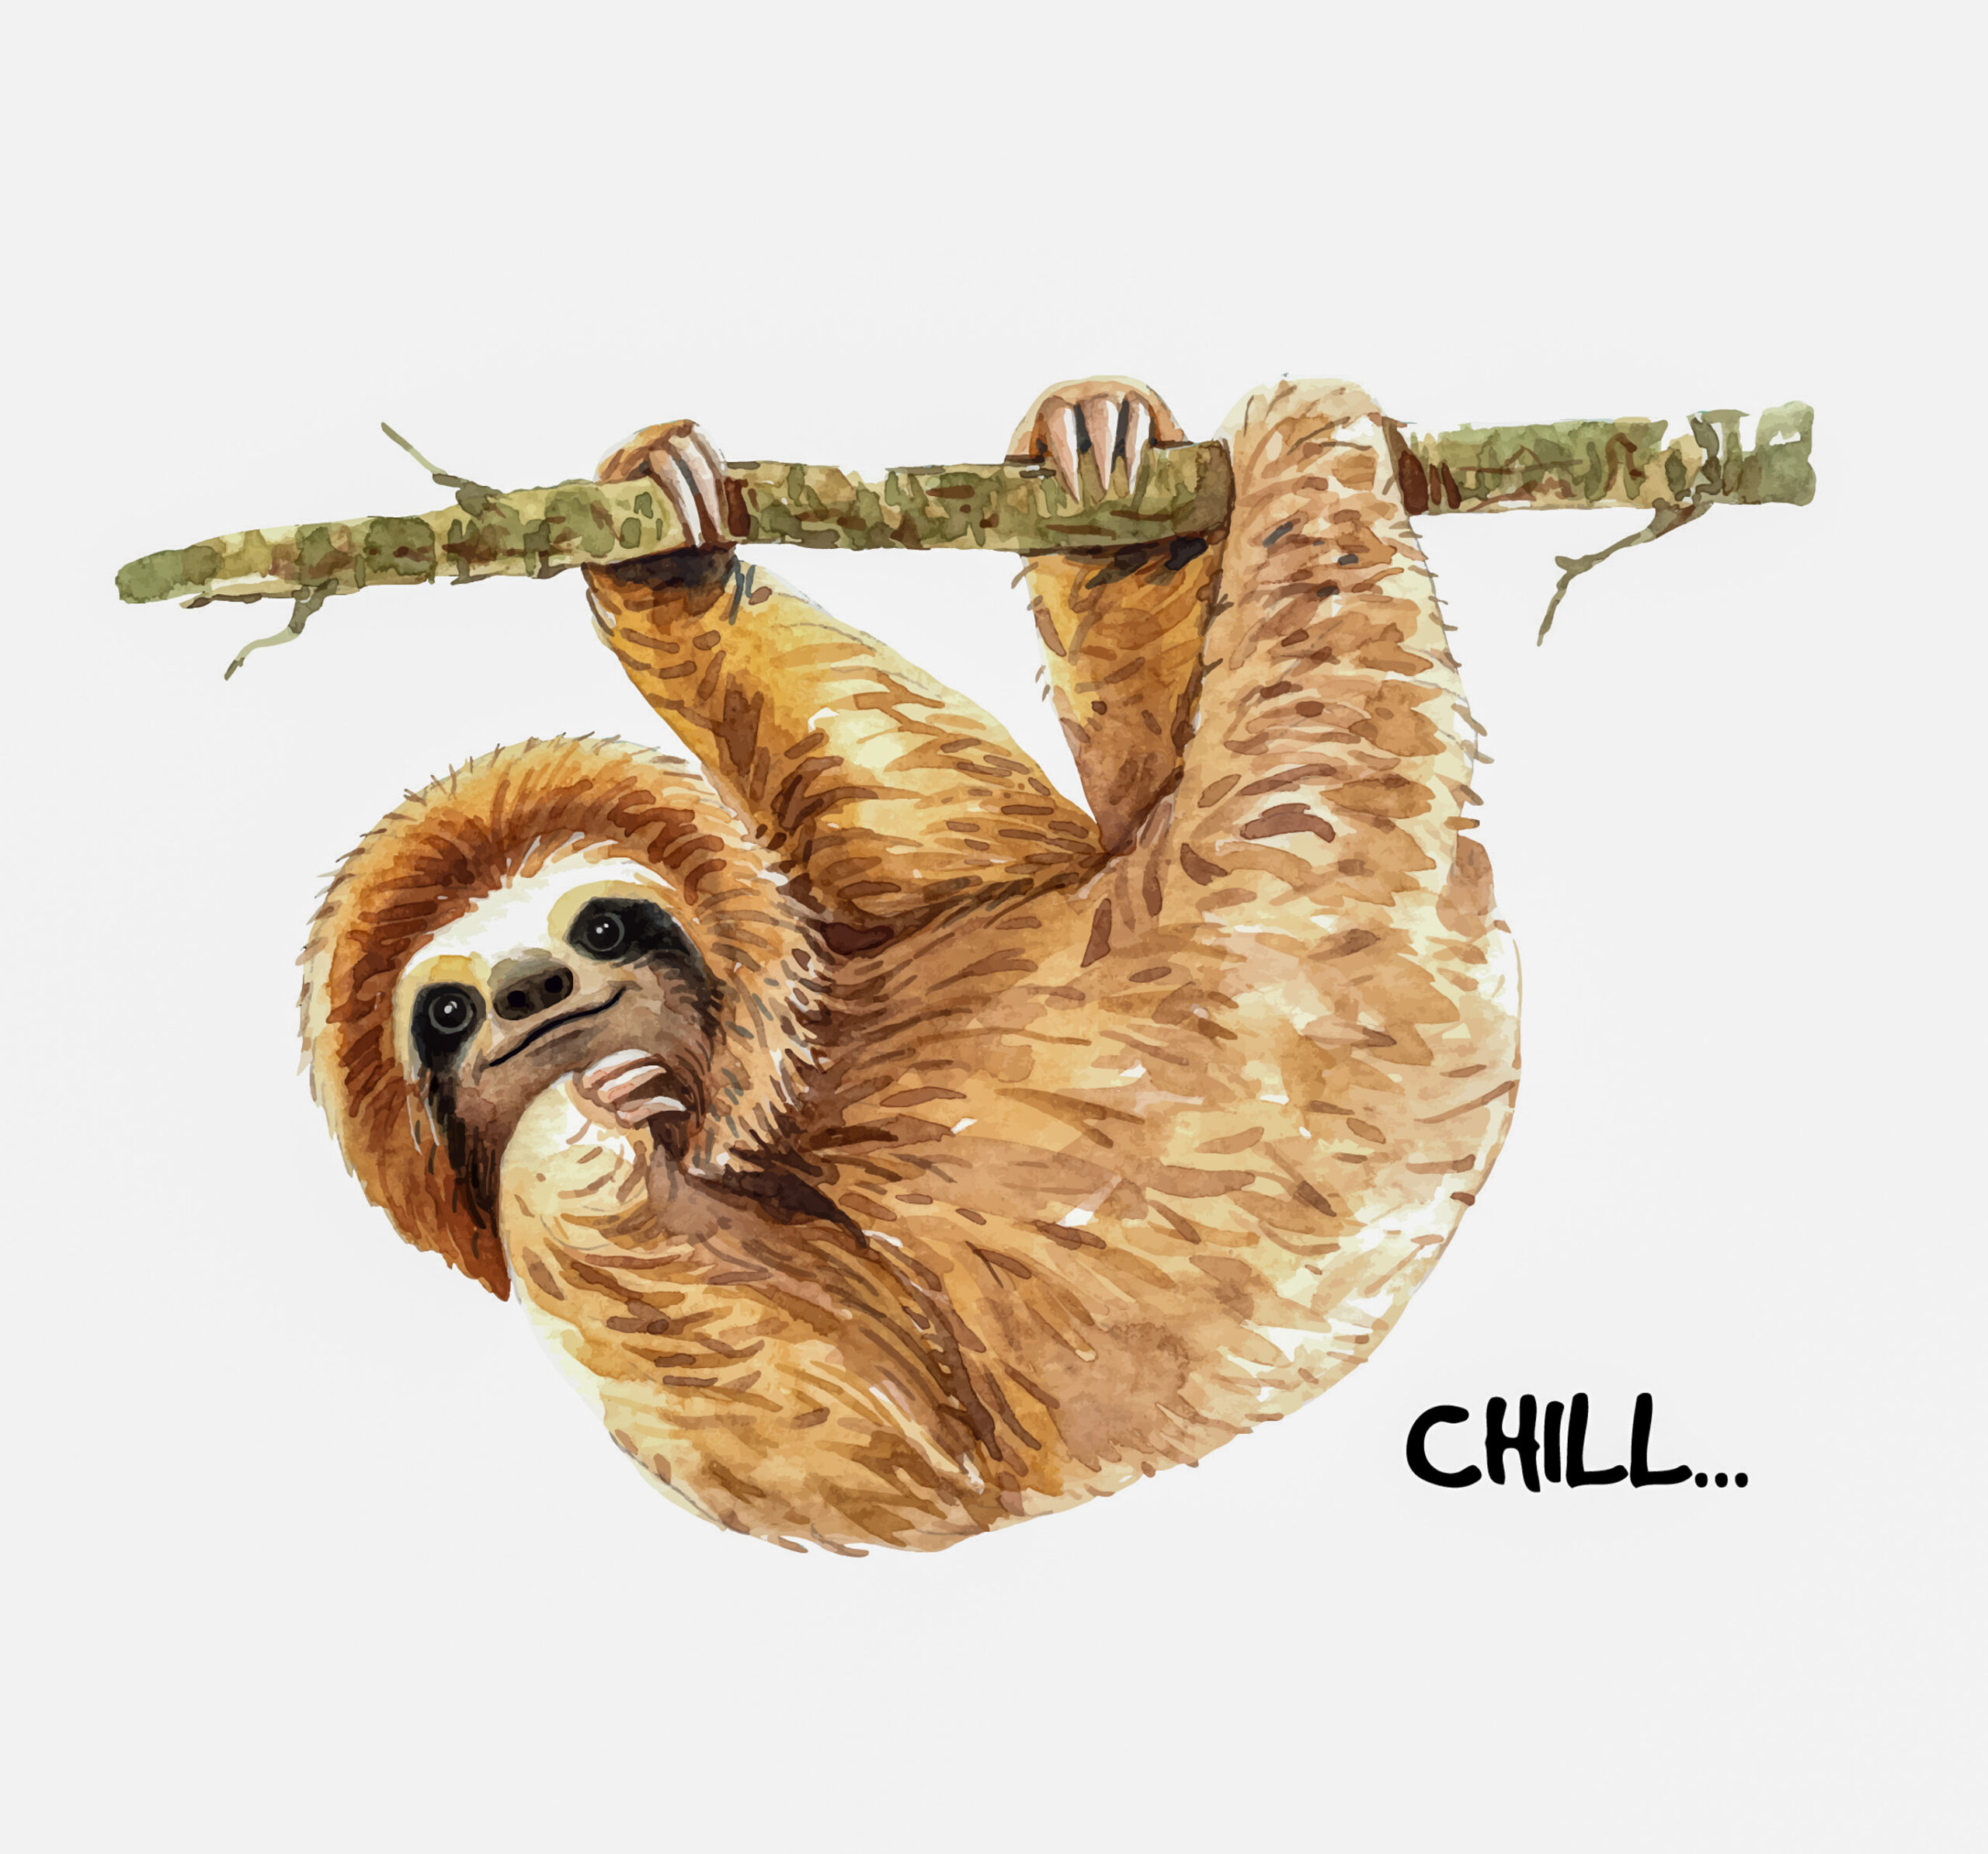 Cartoon character of a sloth hanging from a branch. His name is Chill.